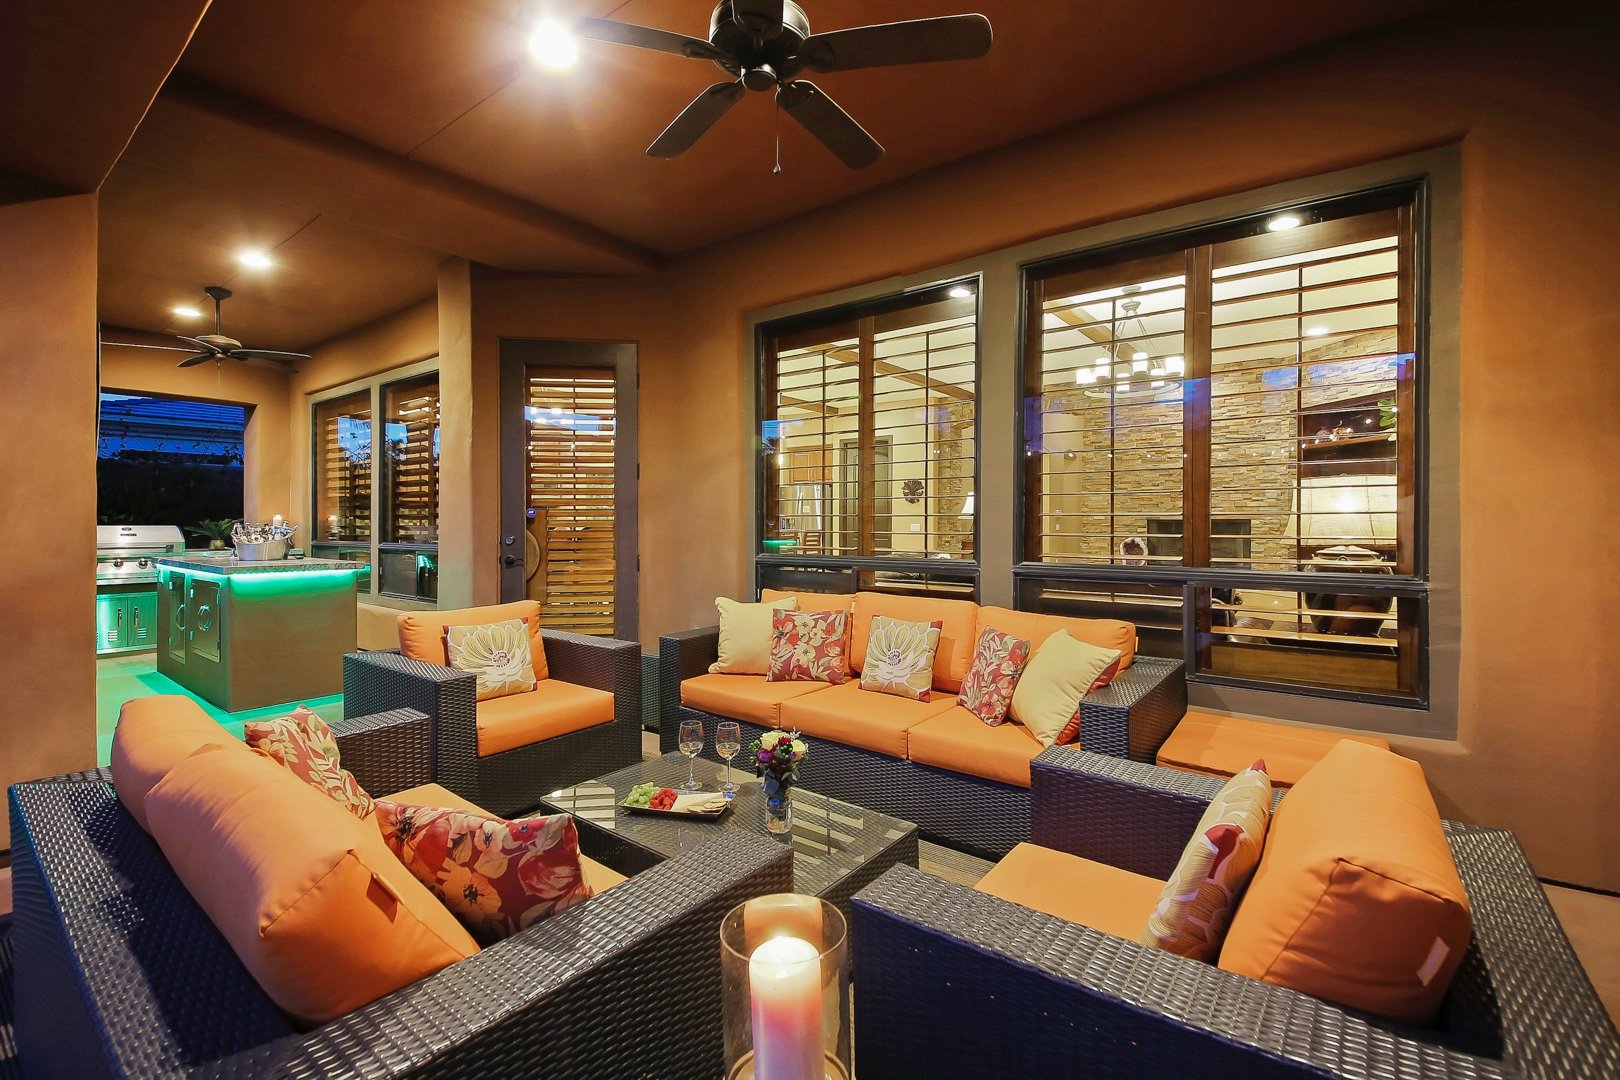 This covered outdoor living area is a favorite.